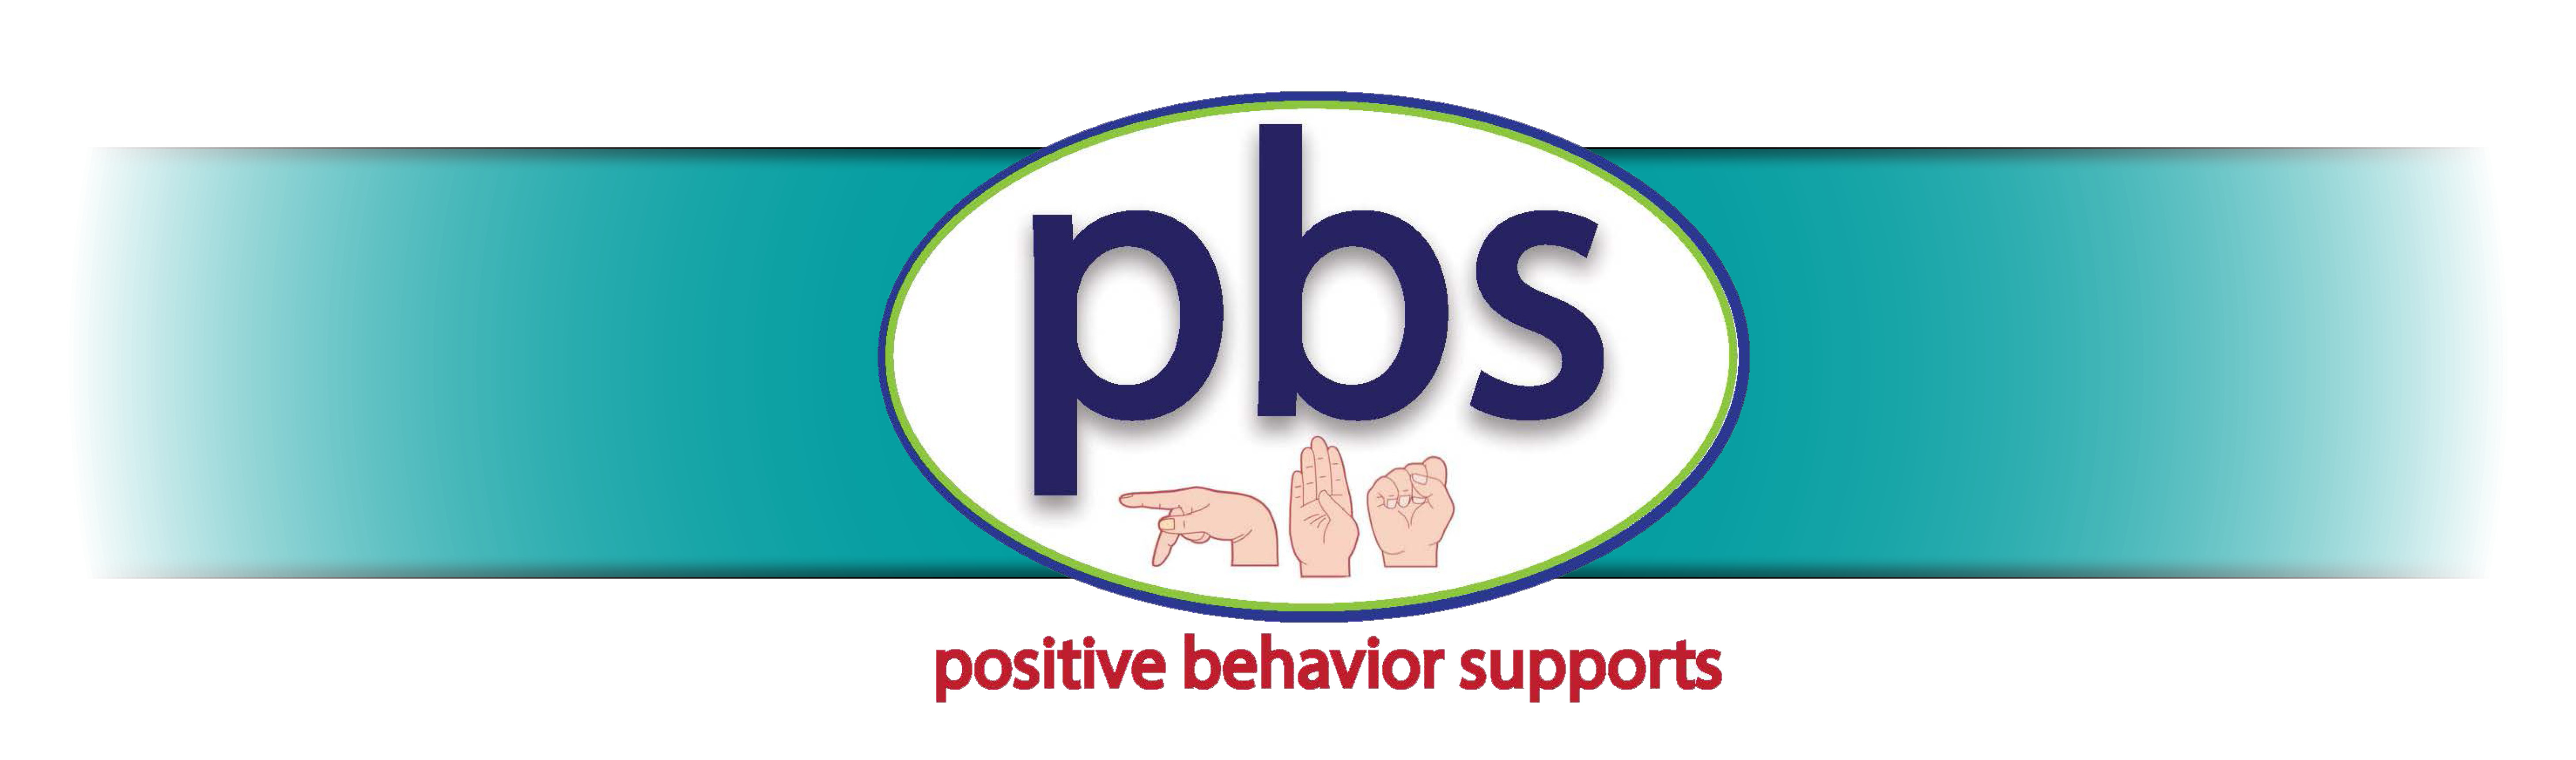 Positive Behavior Supports (PBS) at the Universal Level: Staffing Communication